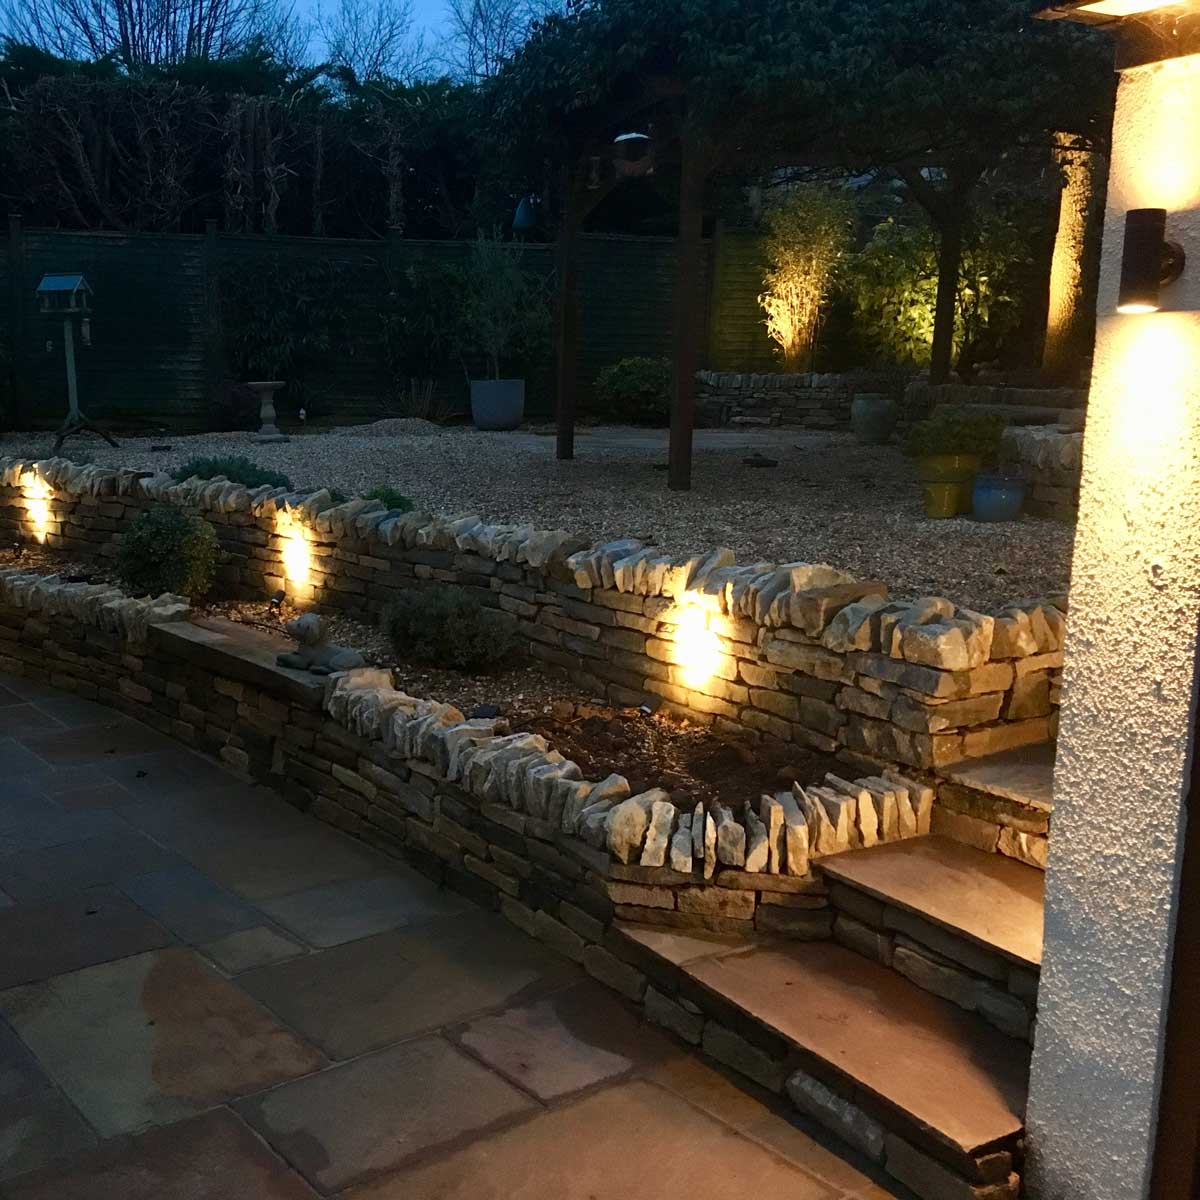 Landscape&#x20;lighting&#x20;installed&#x20;at&#x20;a&#x20;home&#x20;in&#x20;Yettington